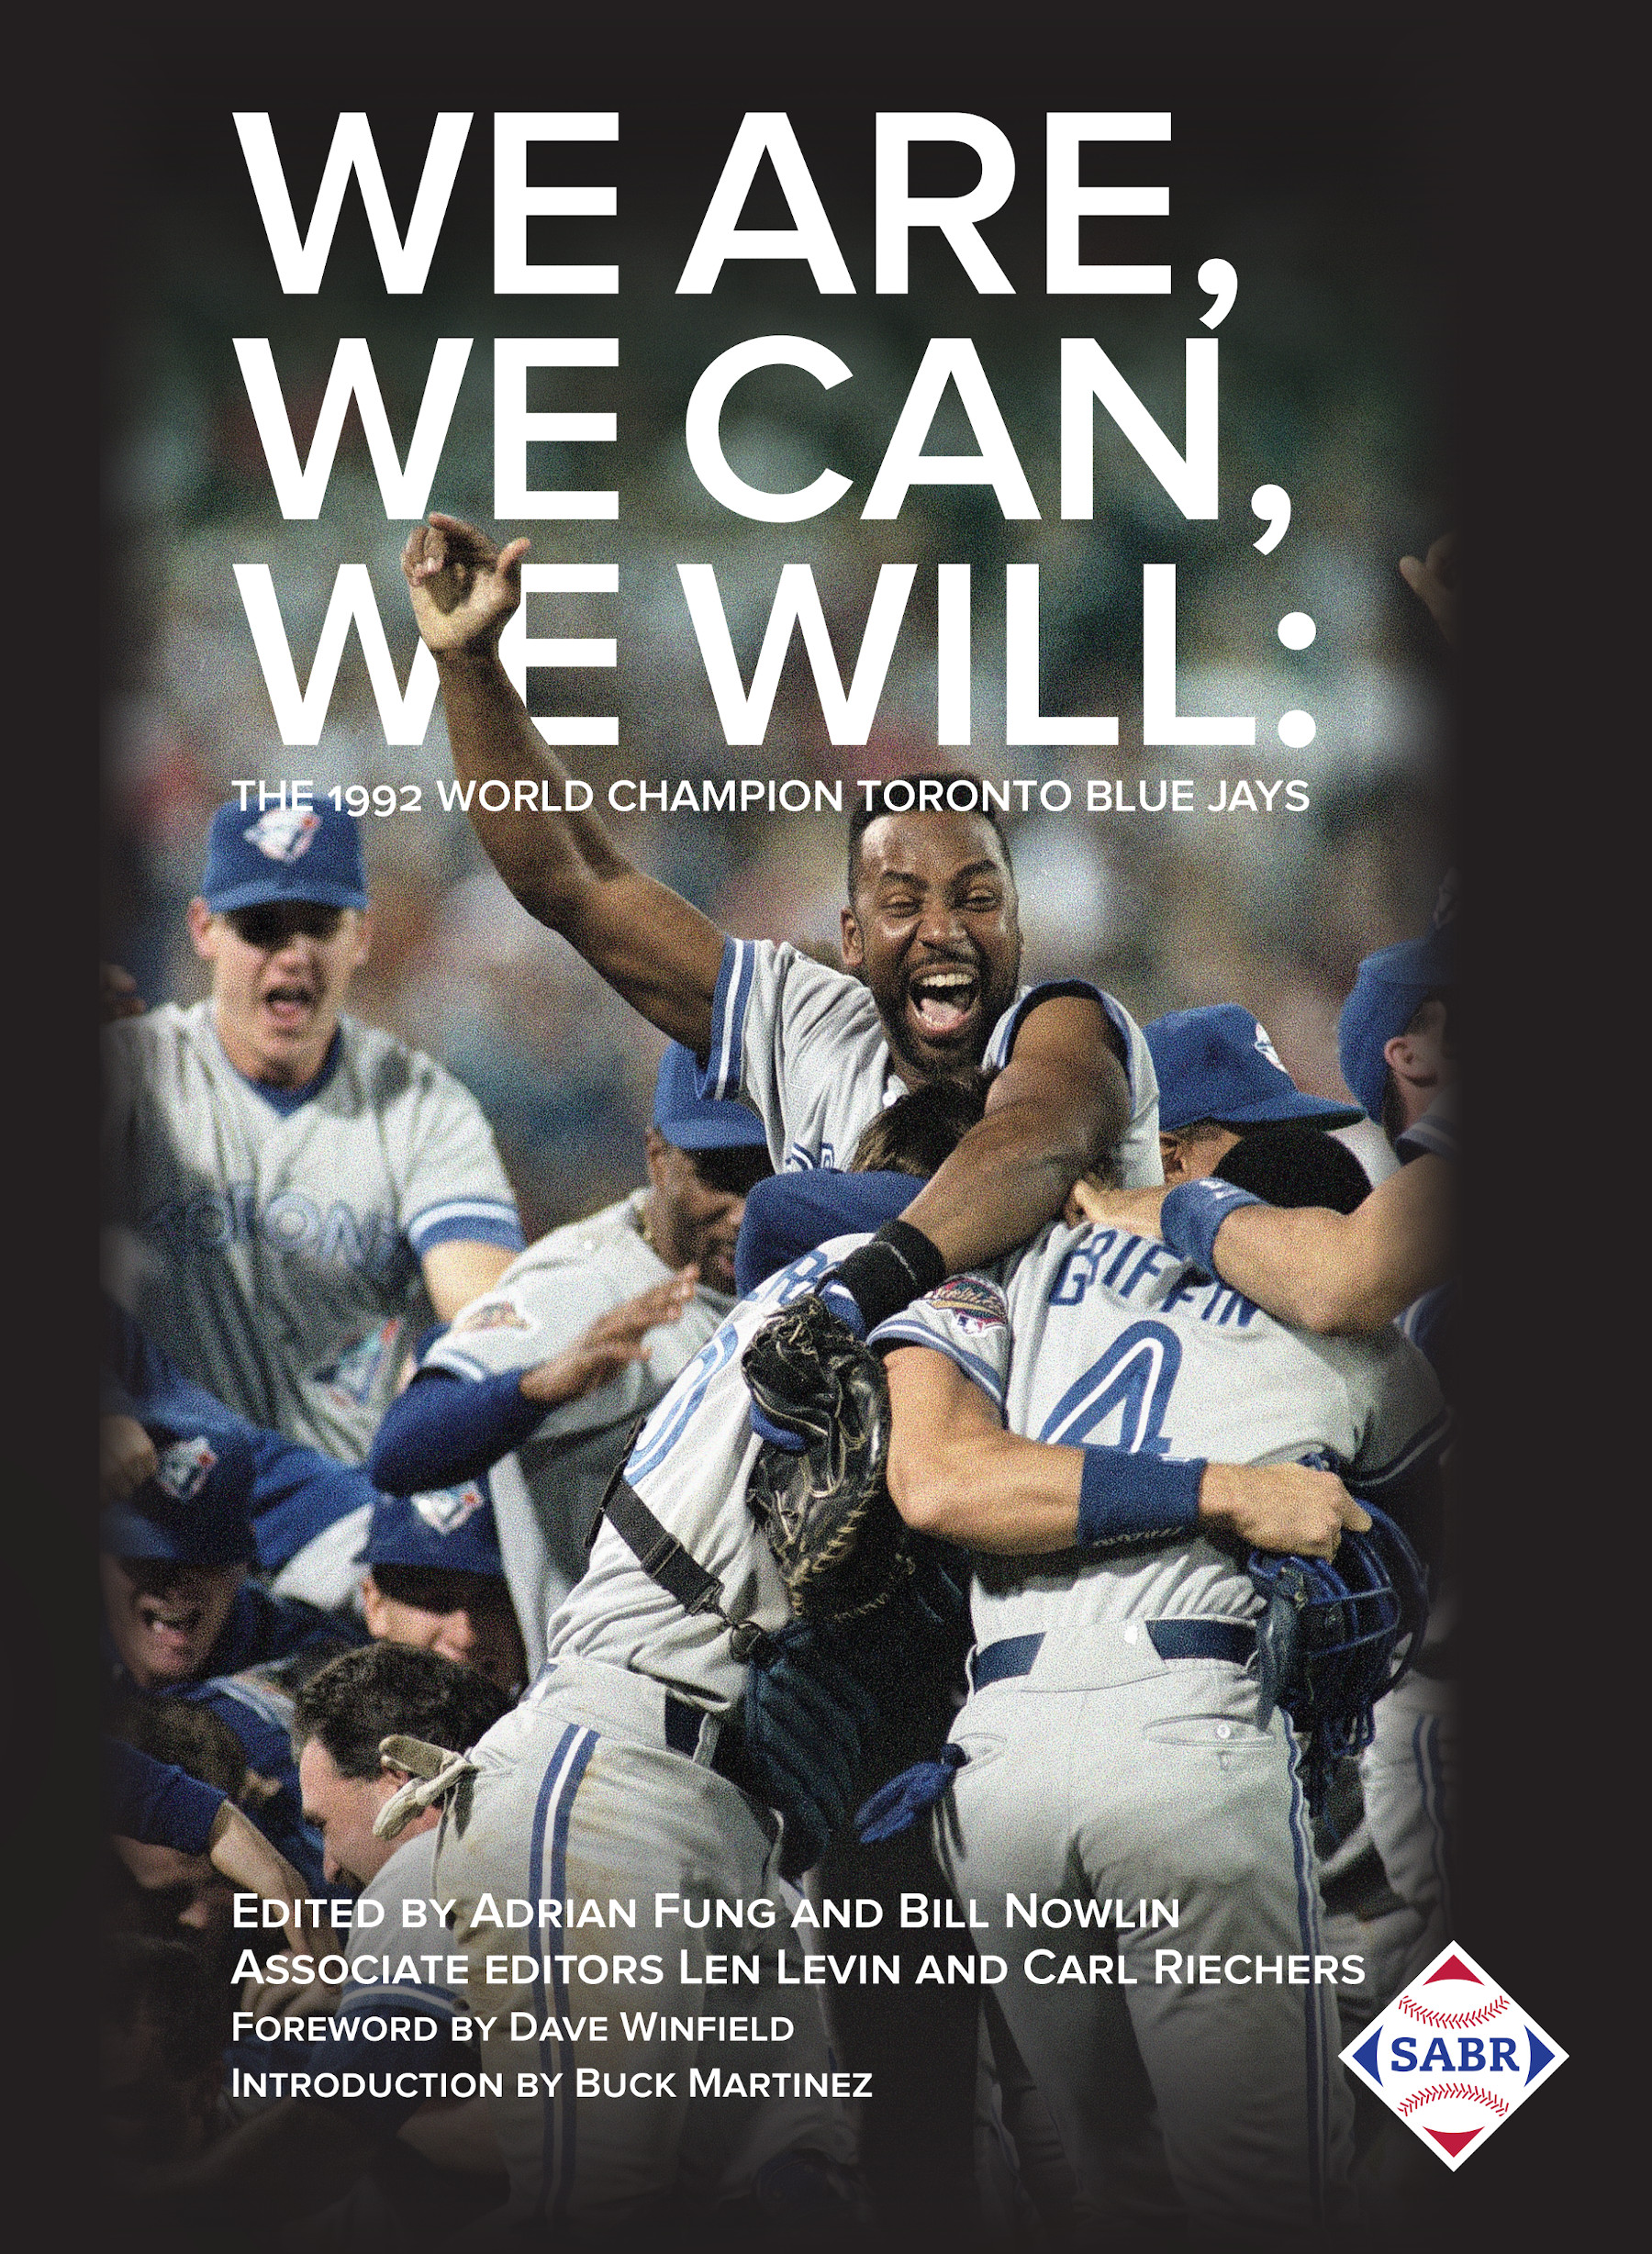 SABR Digital Library: We Are, We Can, We Will: The 1992 World